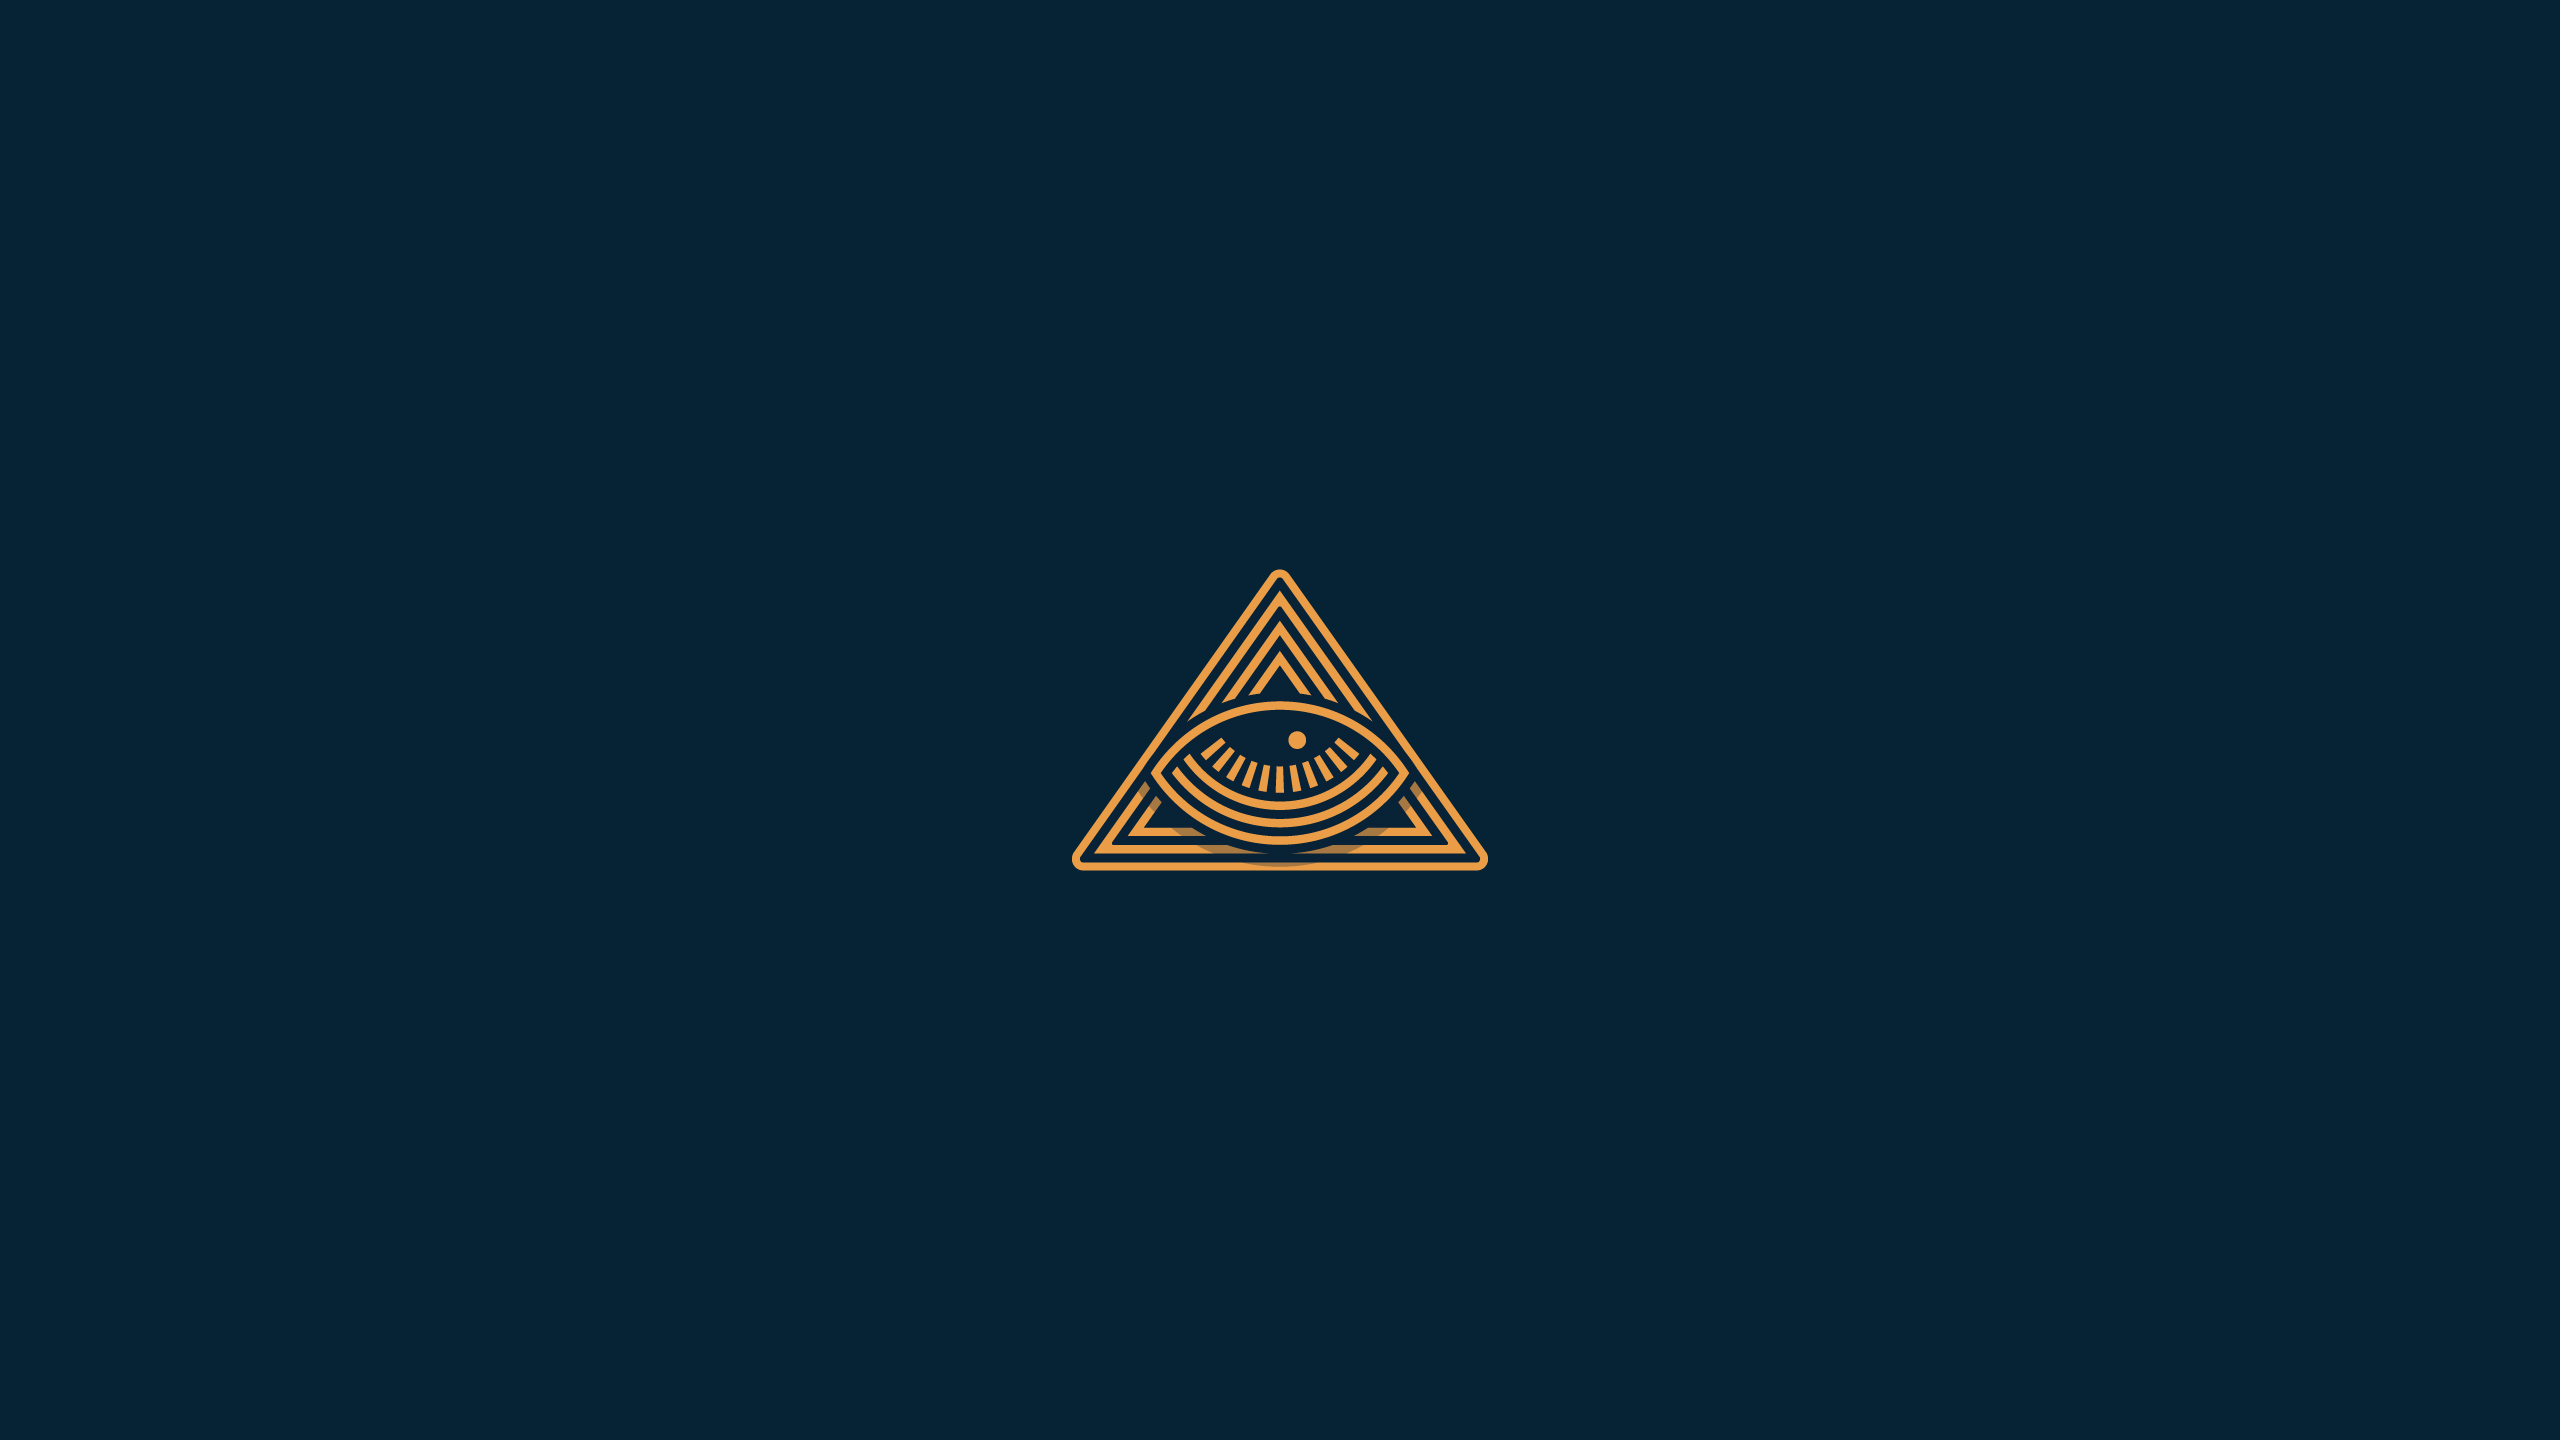 all seeing eye wallpaper,triangle,blue,logo,font,triangle